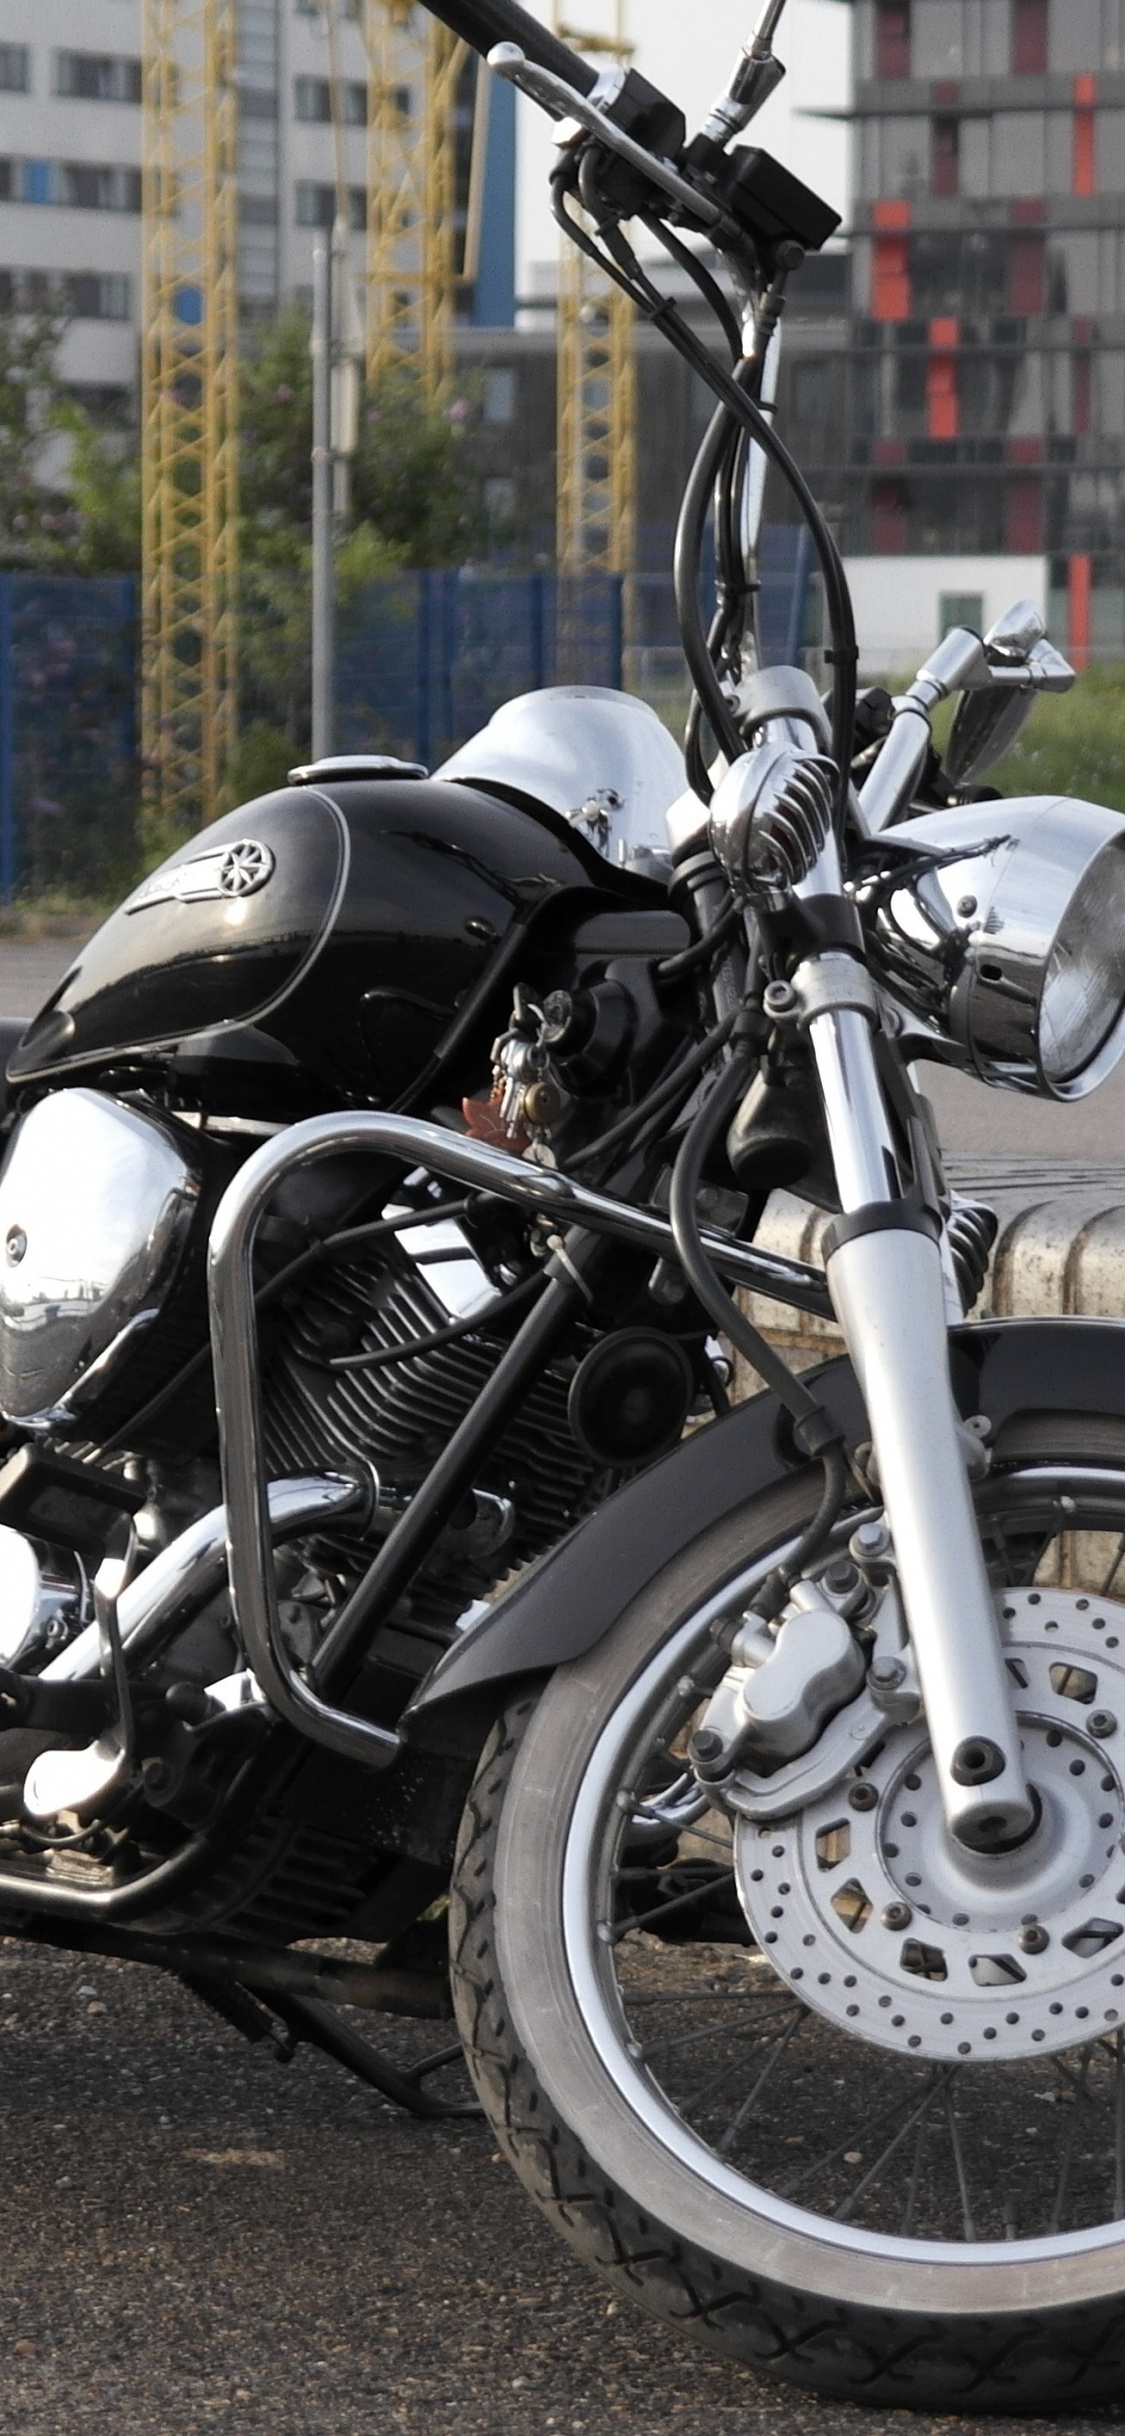 Black and Silver Cruiser Motorcycle on Road During Daytime. Wallpaper in 1125x2436 Resolution